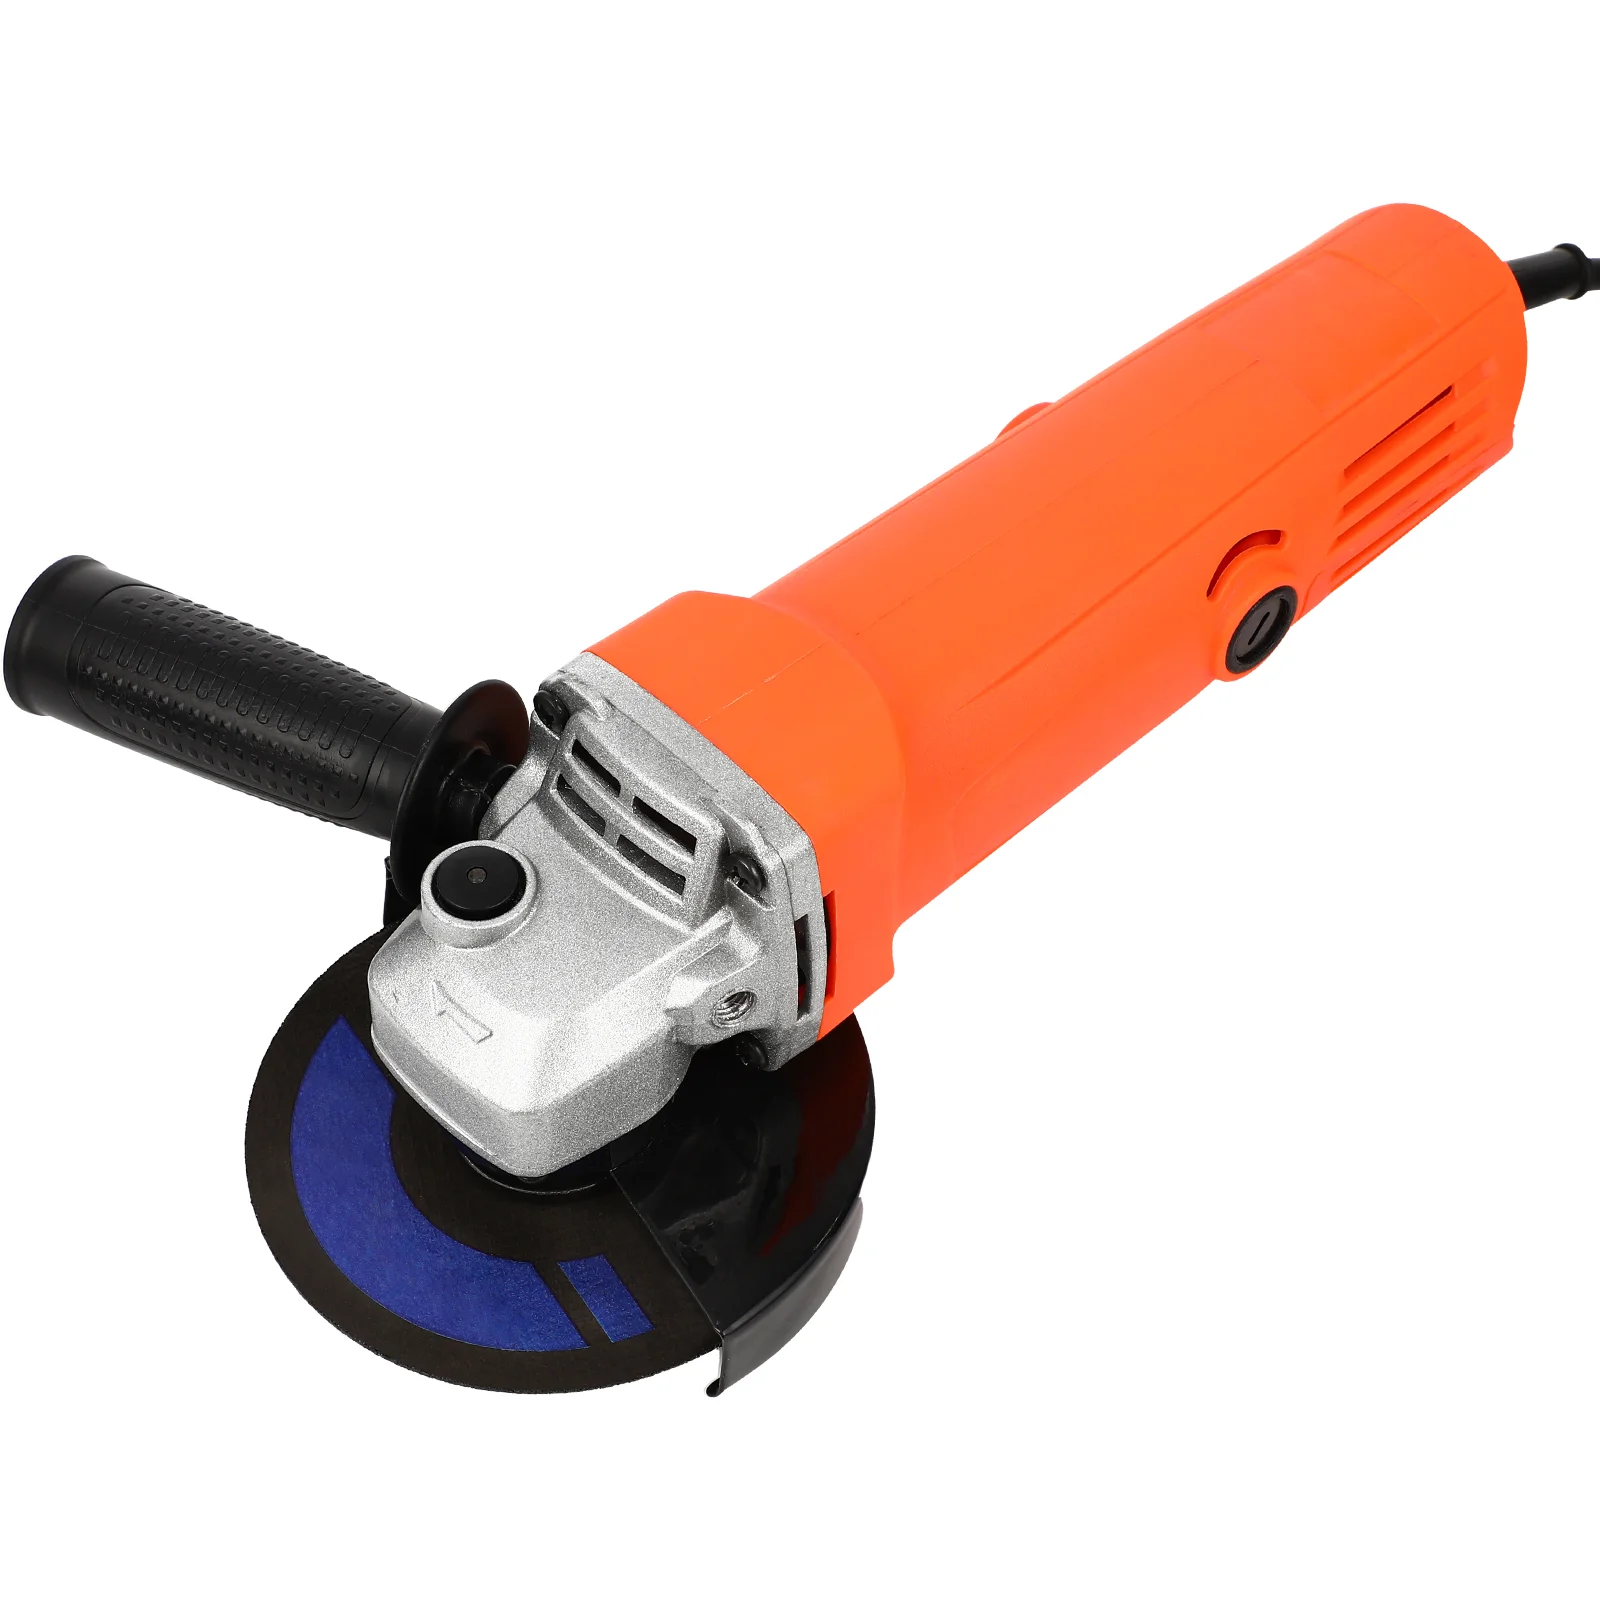 

Electric Sanders Angle Grinder Polishing Power Machine Pulley Polisher Iron Brushed Grinding Tool